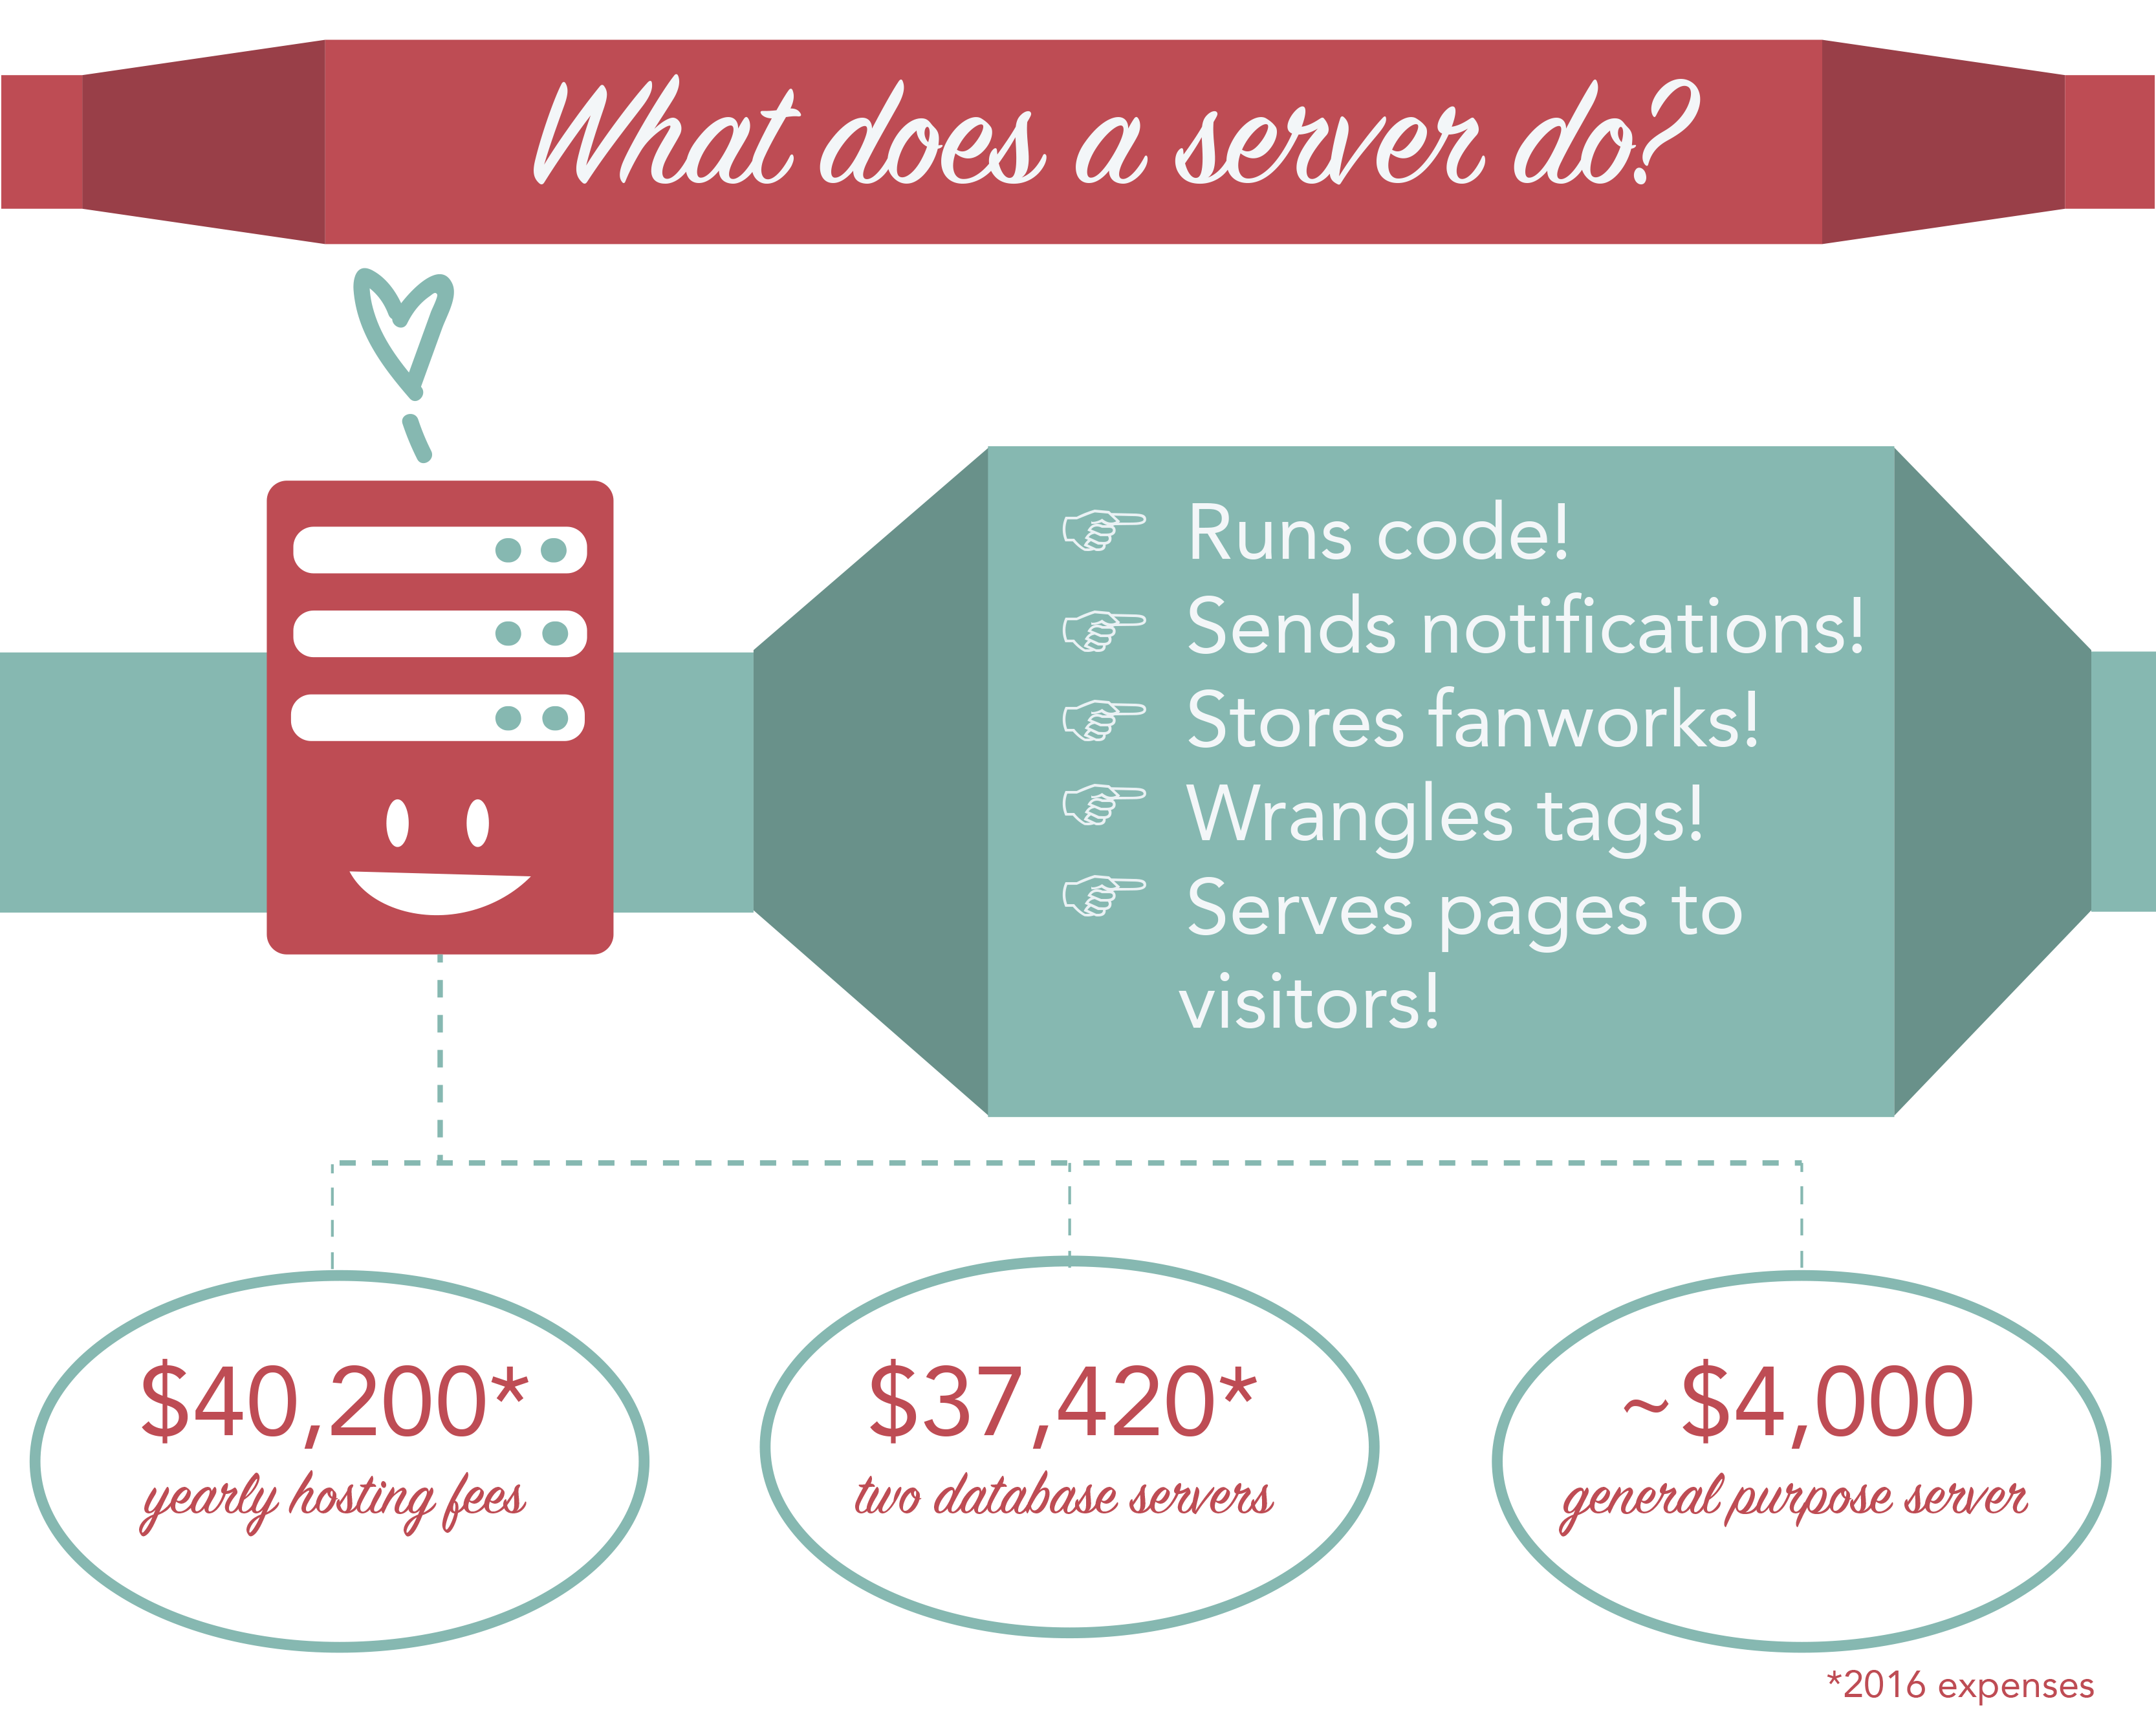 Our servers run code, send notifications, store fanworks, wrangle tags and serve pages to visitors. Common server costs: $40,200 in yearly hosting fees, $37,420 for two database servers and about $4,000 for a general purpose server—the first two of which the OTW spent this year.